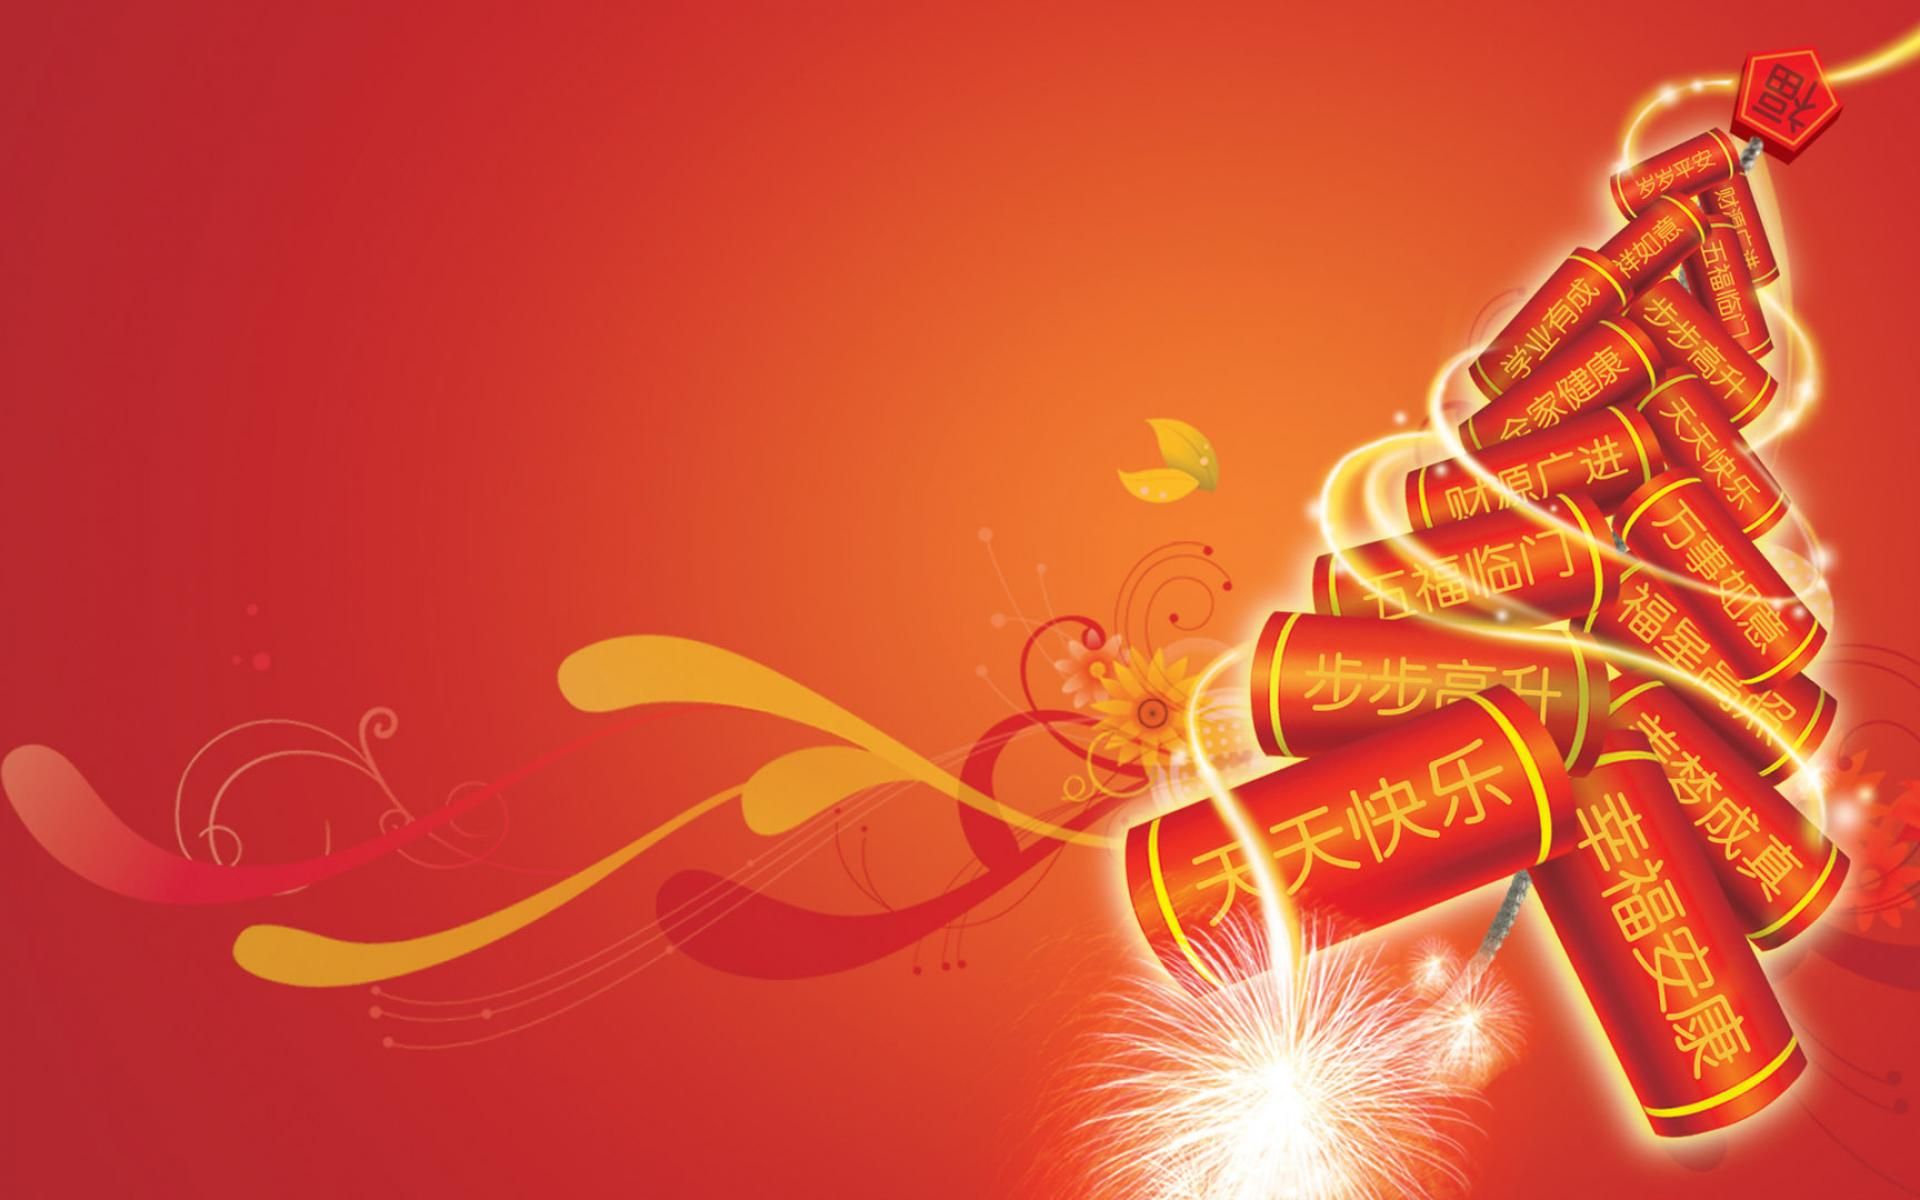 Wishing You A Happy & Prosperous Chinese New Year.